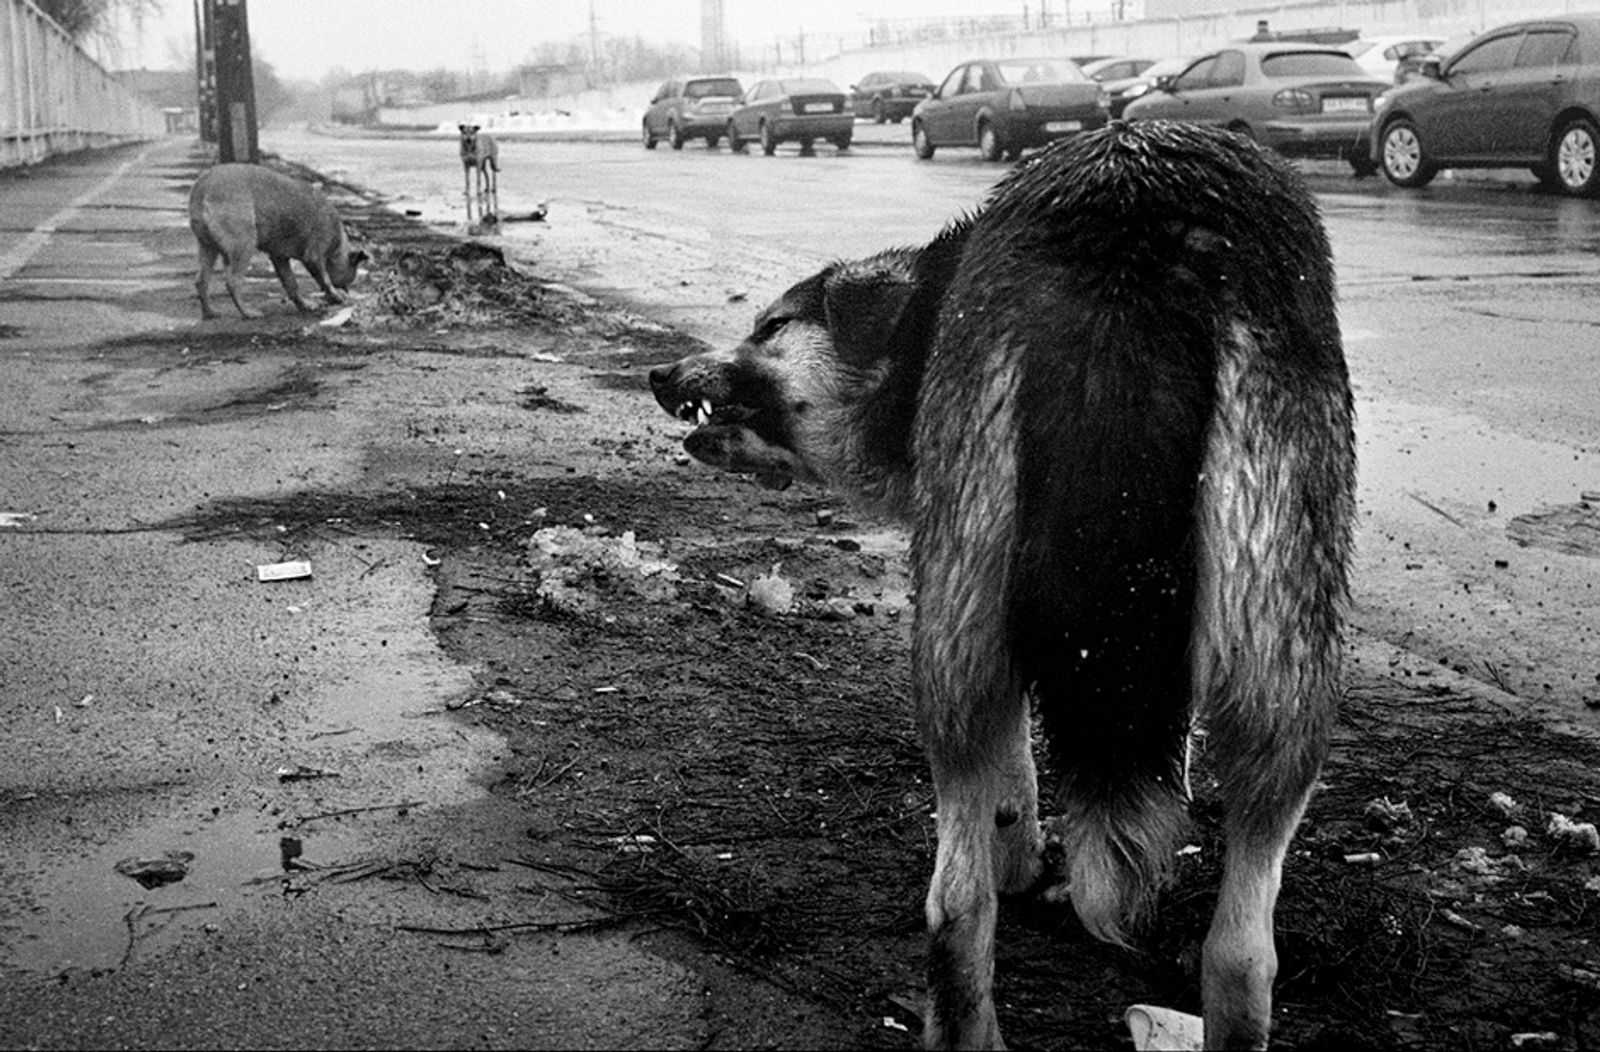 © Anna Voitenko - The territory near street market where live lots of street dogs. People from the market feed them. Kyiv